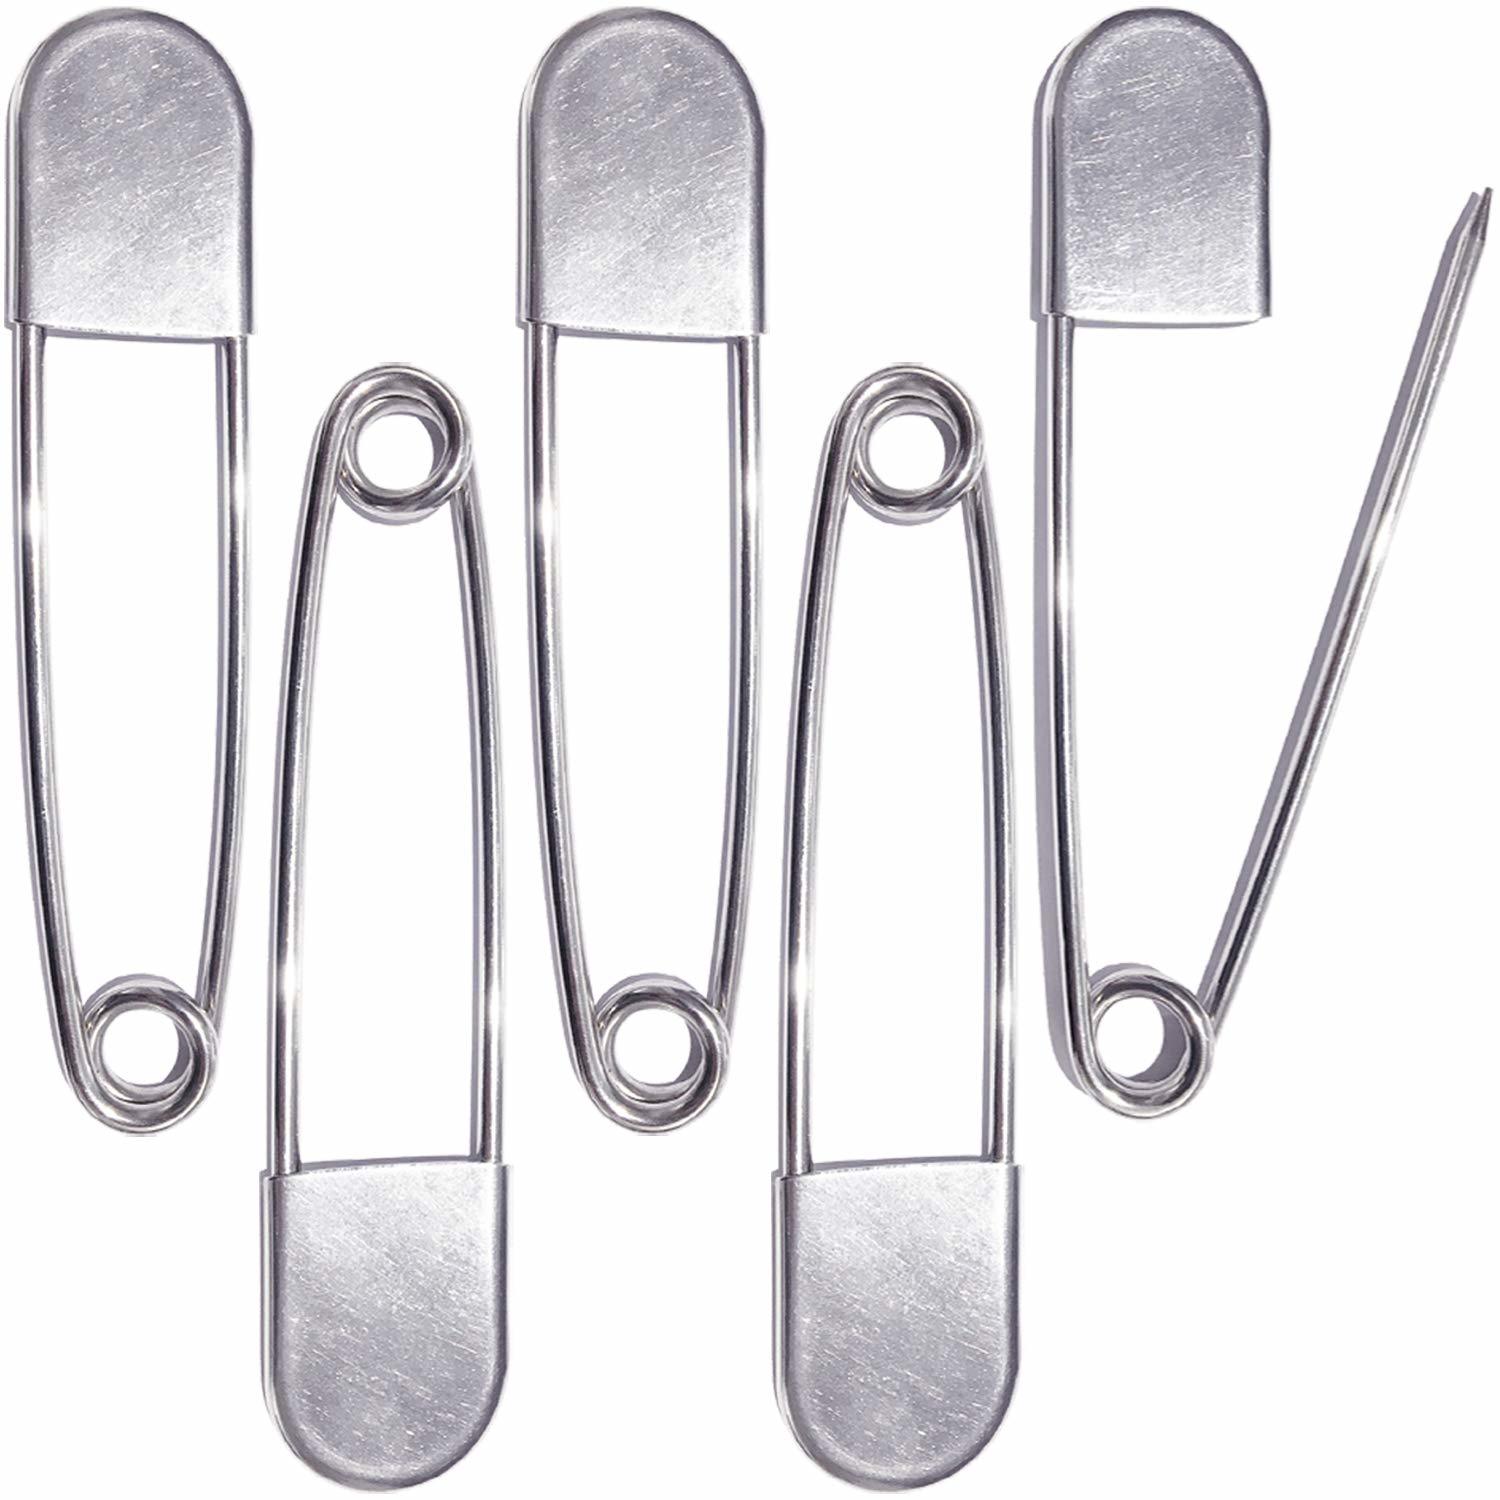  2 Inch 54mm Heavy Duty Steel Large Safety Pins